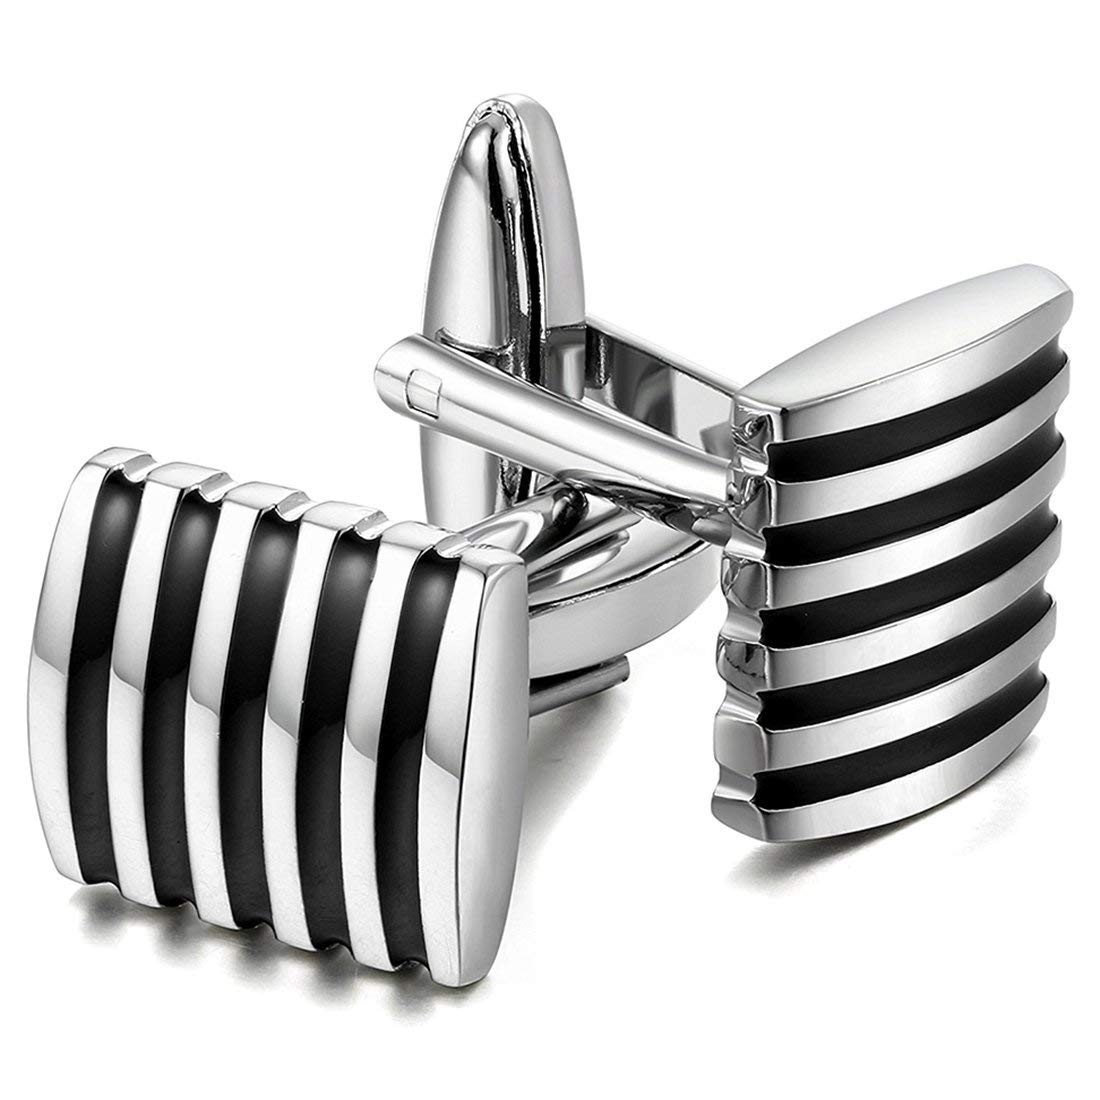 Yellow Chimes Cufflinks for Men Strips Black Cuff links with Enamal Finish Stainless Steel Cufflinks for Men and Boy's.